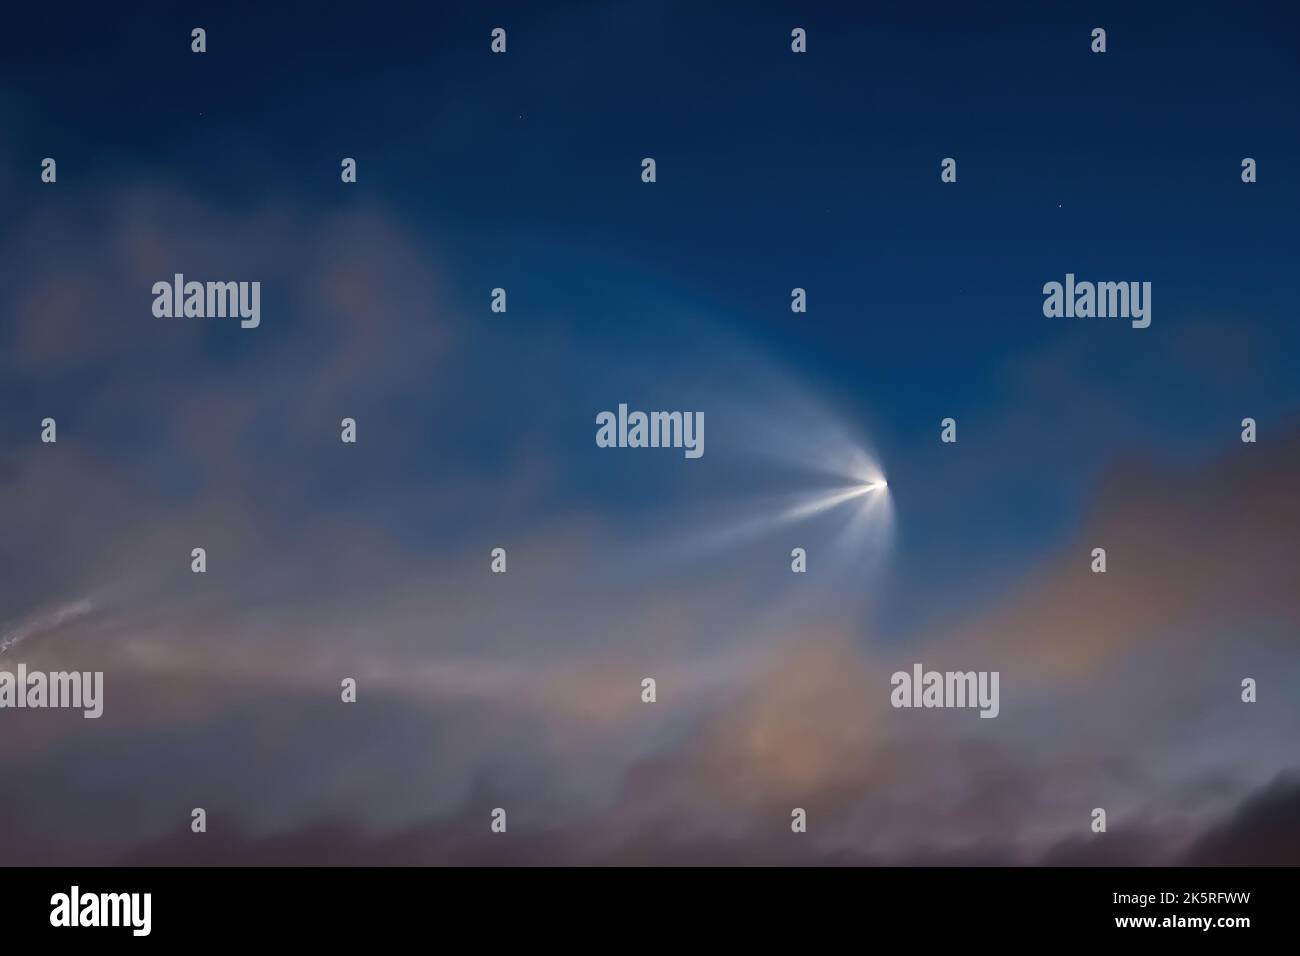 Soyuz space rocket launch. Space jellyfish in sky. Plume of rocket gases in sun at dawn. Jet trail from space rocket. Astronomical phenomenon over cit Stock Photo